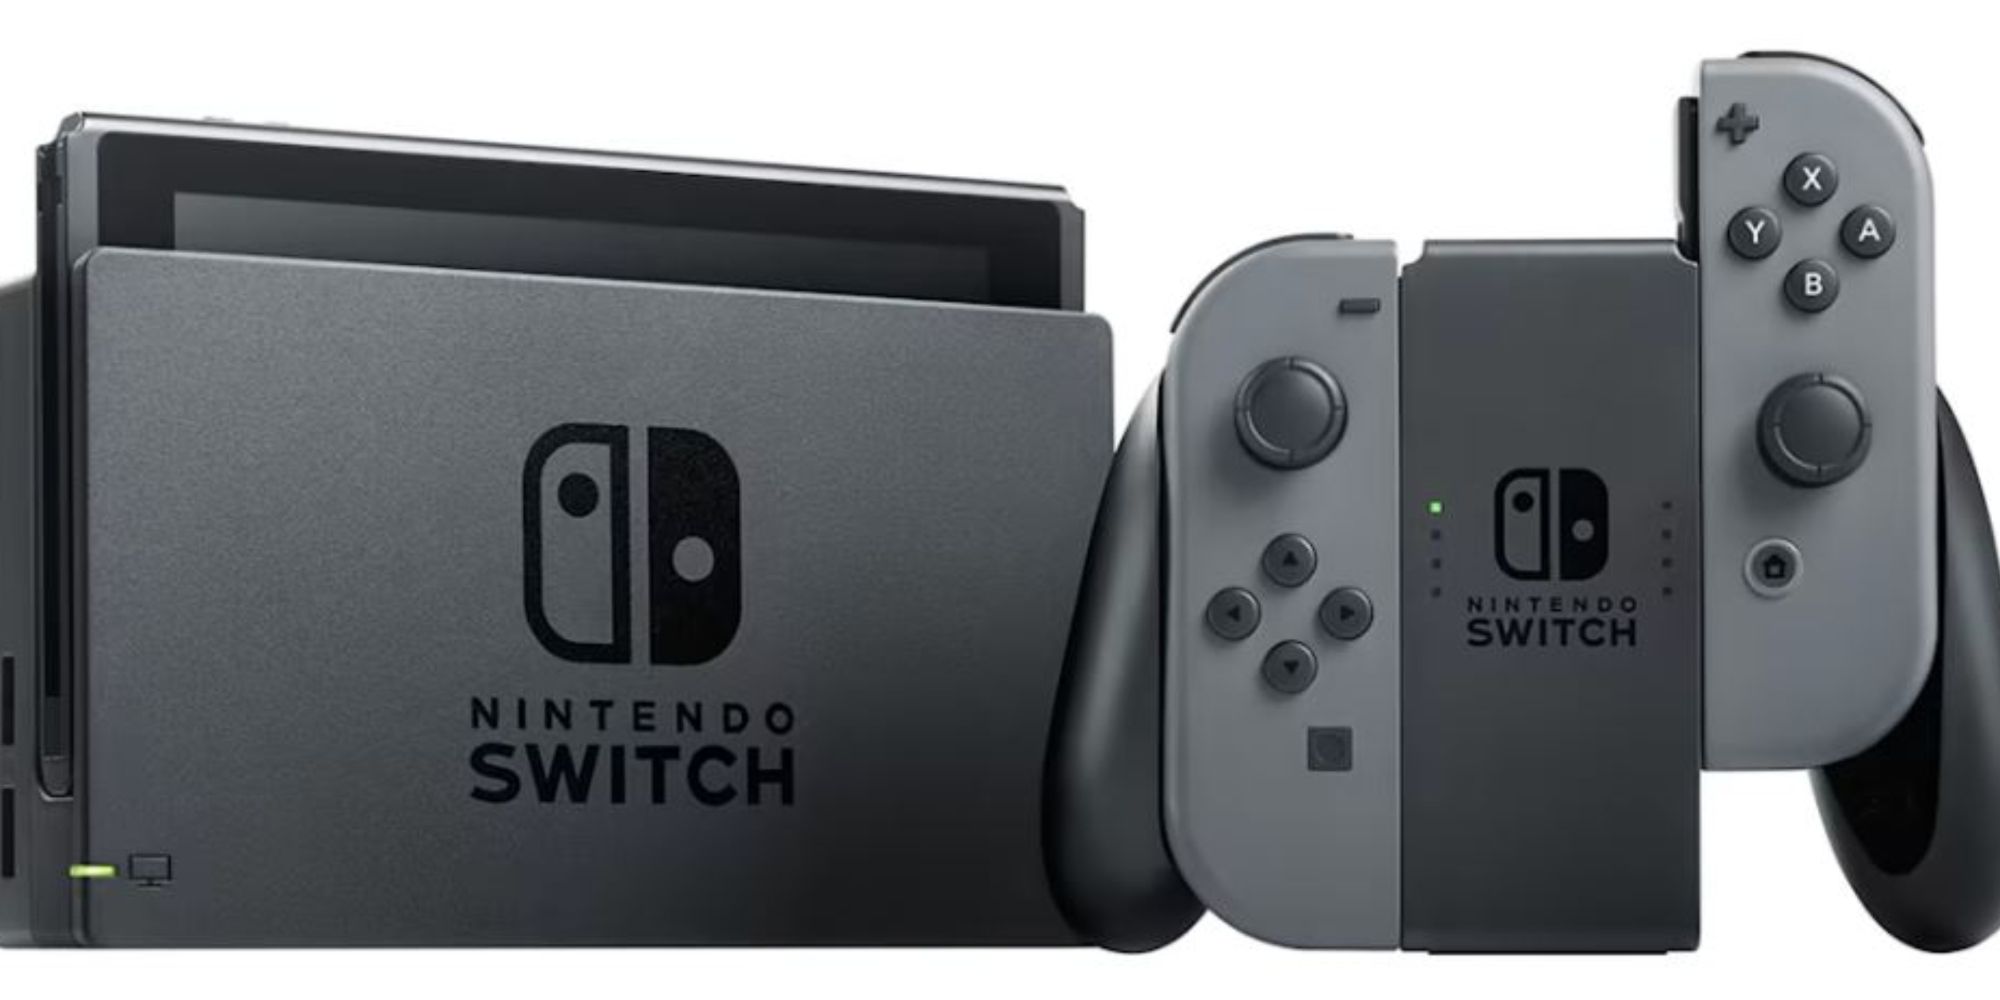 The Nintendo Switch is inside the dock as the gray Joycons are connected to the console.